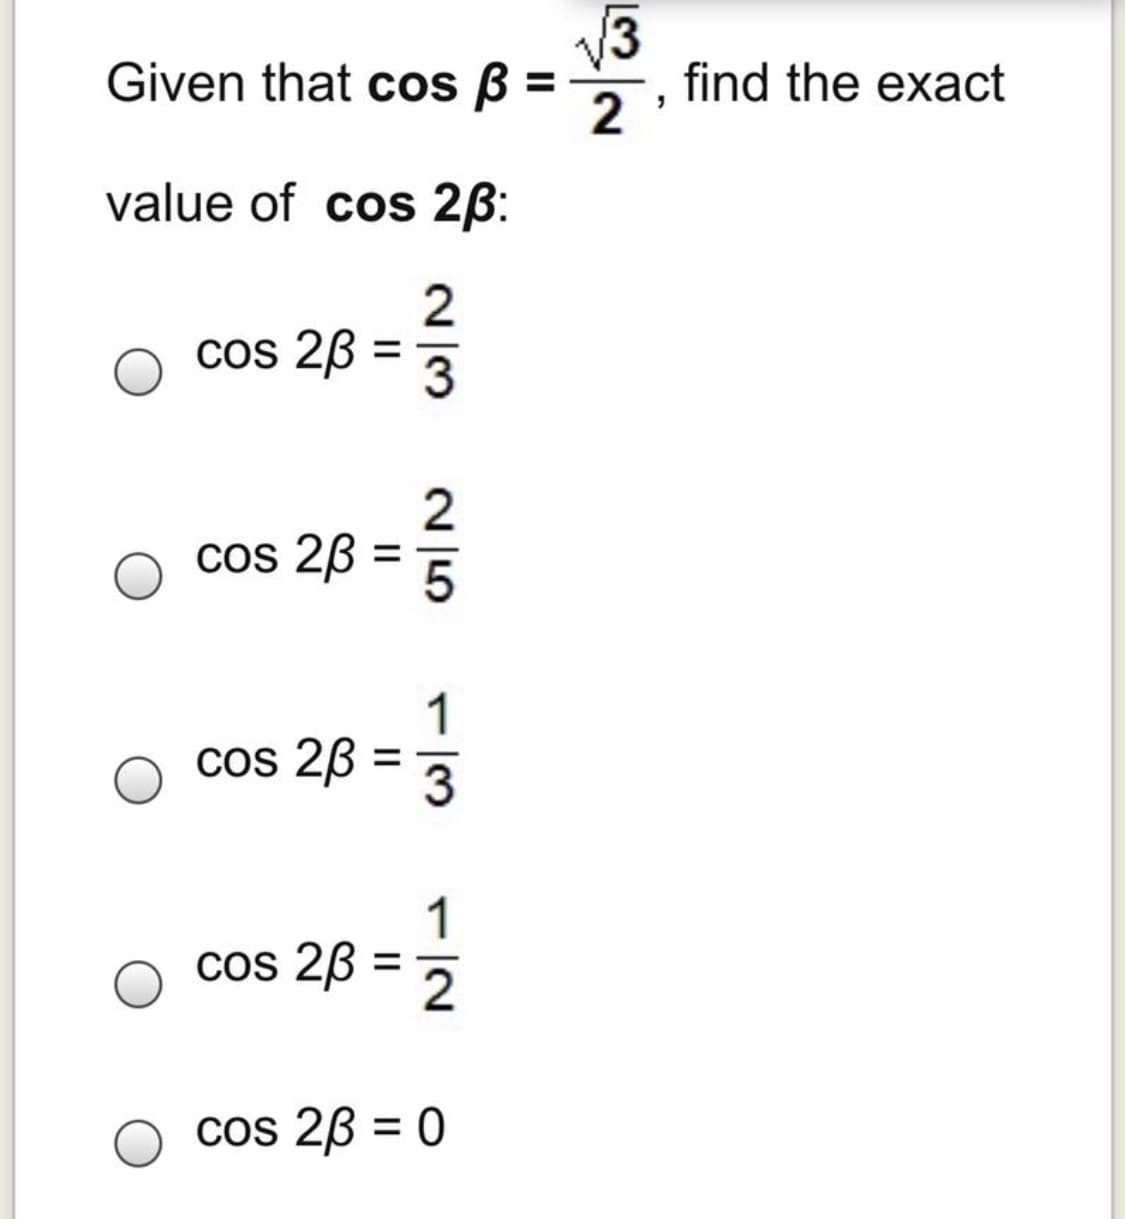 V3
find the exact
2
Given that cos B =
value of cos 2B:
2
cos 23
:
cos 23 :
1
Cos 2B = 3
%3D
1
cos 2B = 2
%3D
cos 2B = 0
